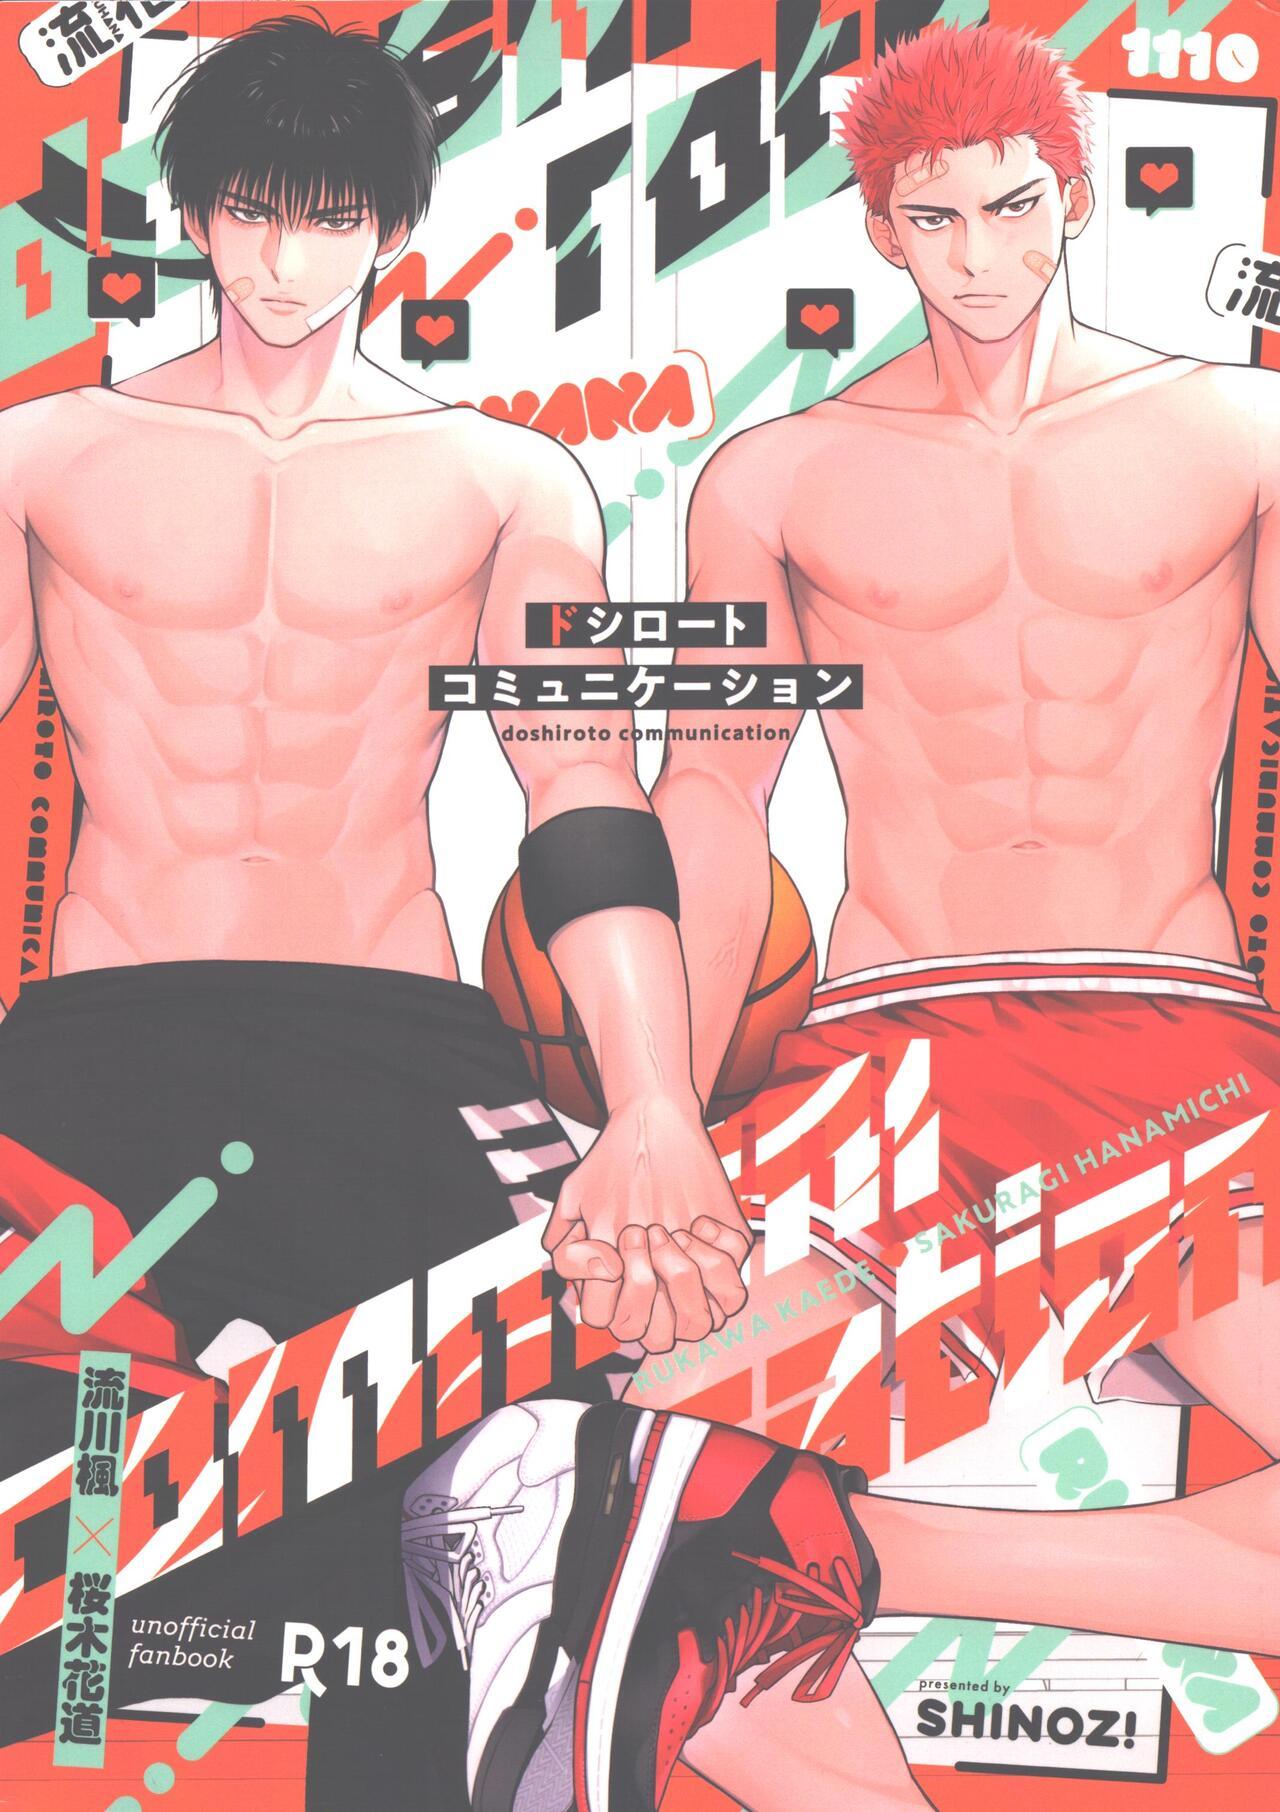 Married doshiroto communication - Slam dunk Gay - Picture 1